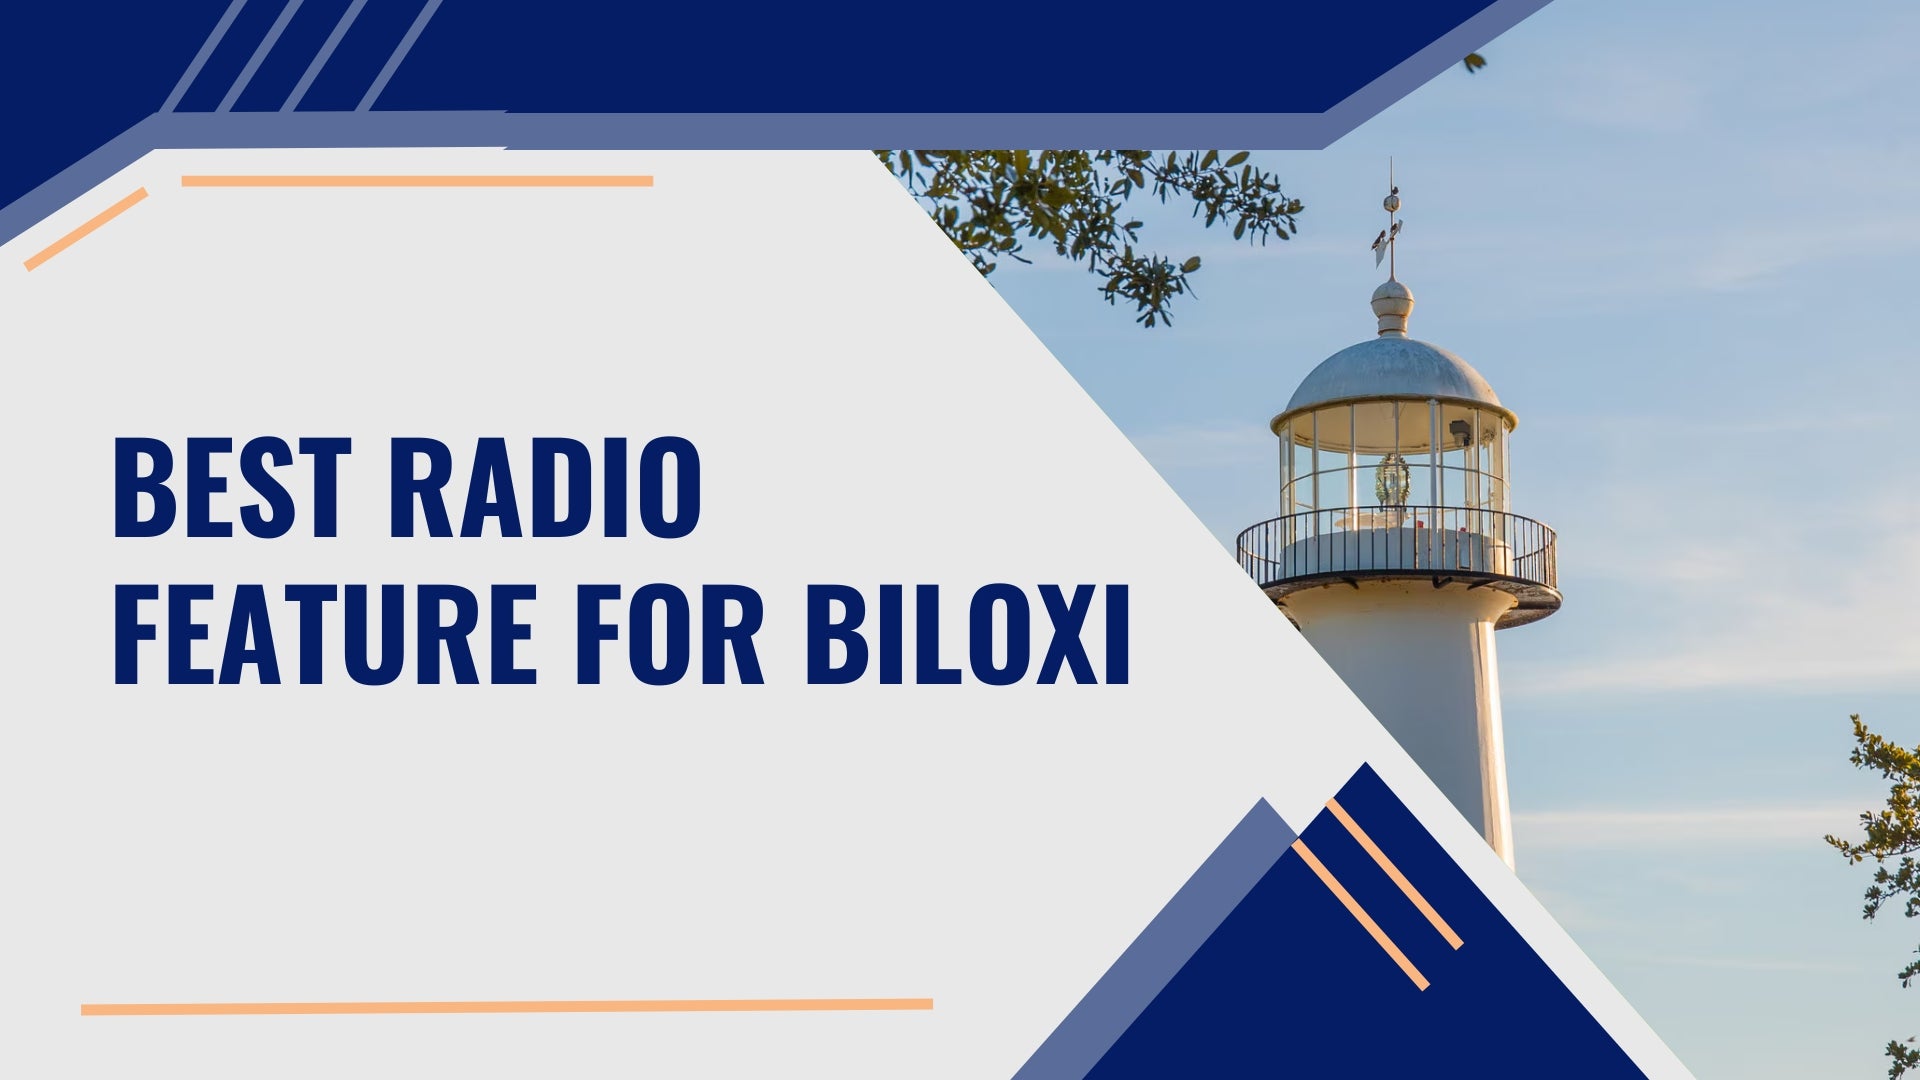 What's The Best Radio Feature In Biloxi?